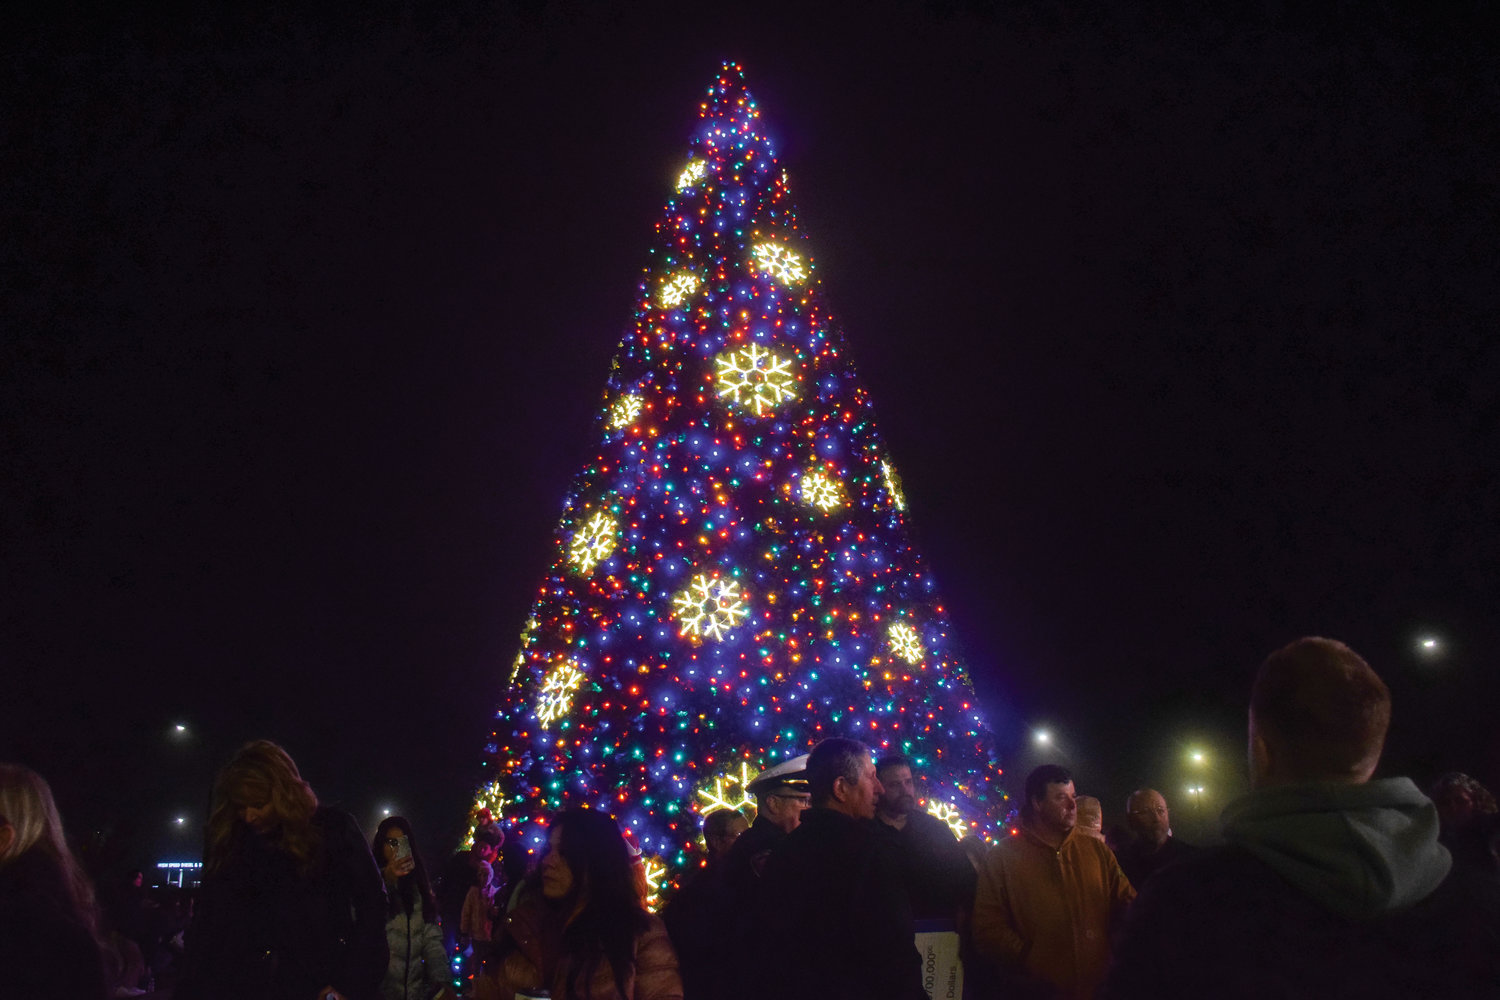 The Christmas tree at ilani lights up the night during a ceremony at the casino on Nov. 23.